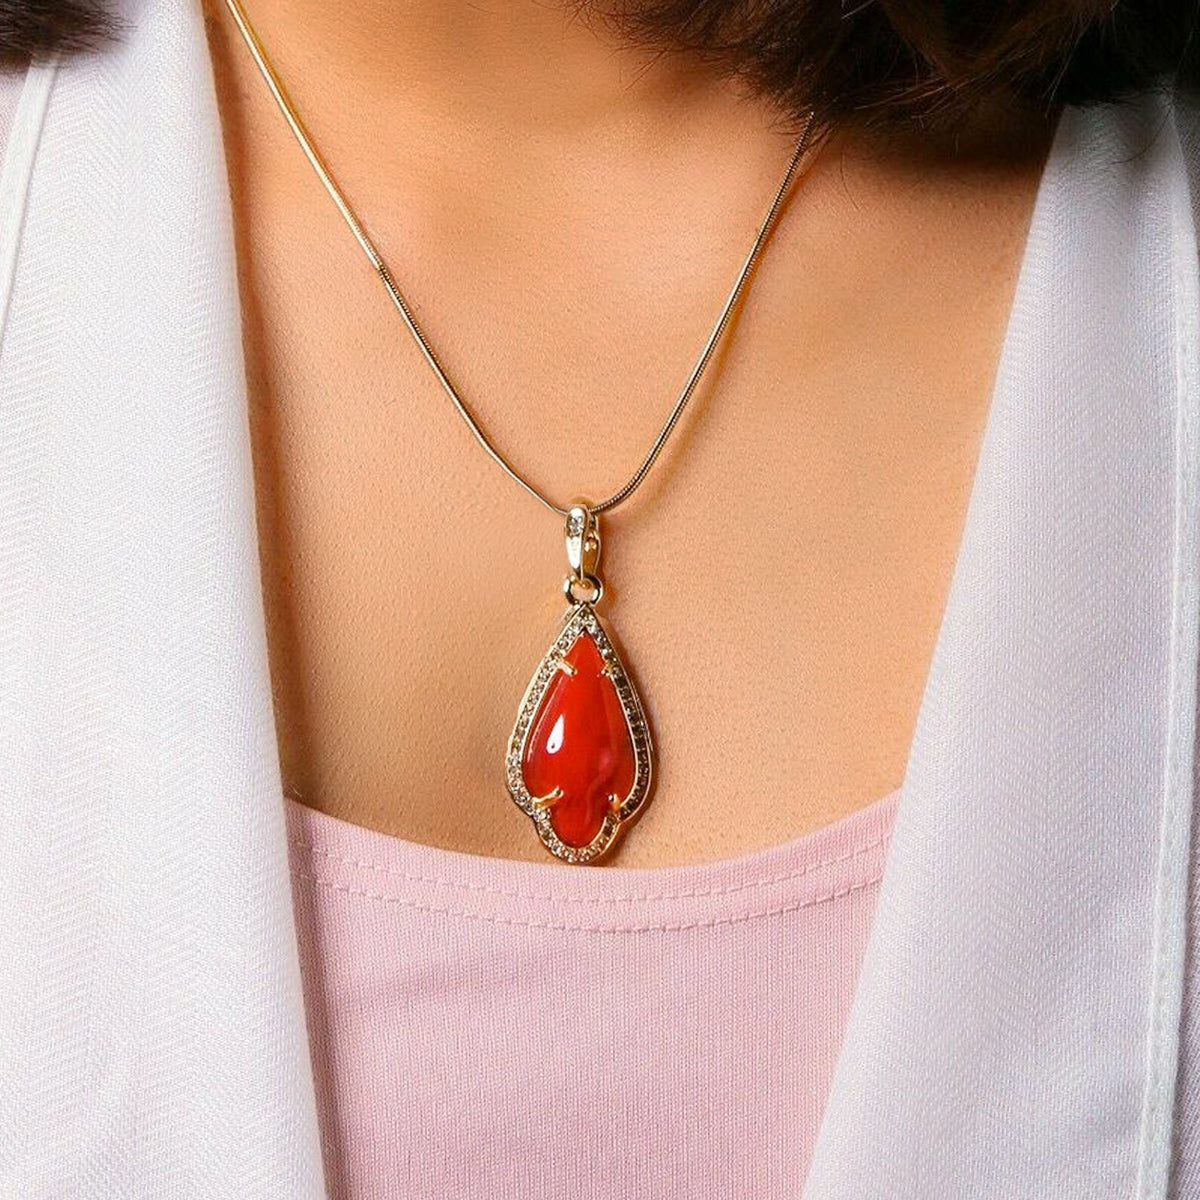 Red Women's Pendants 14K Gold Plated Lab Diamond Mounted Curved Tear Resin Jade High Fashion Jewelry Chain Pendant Necklaces